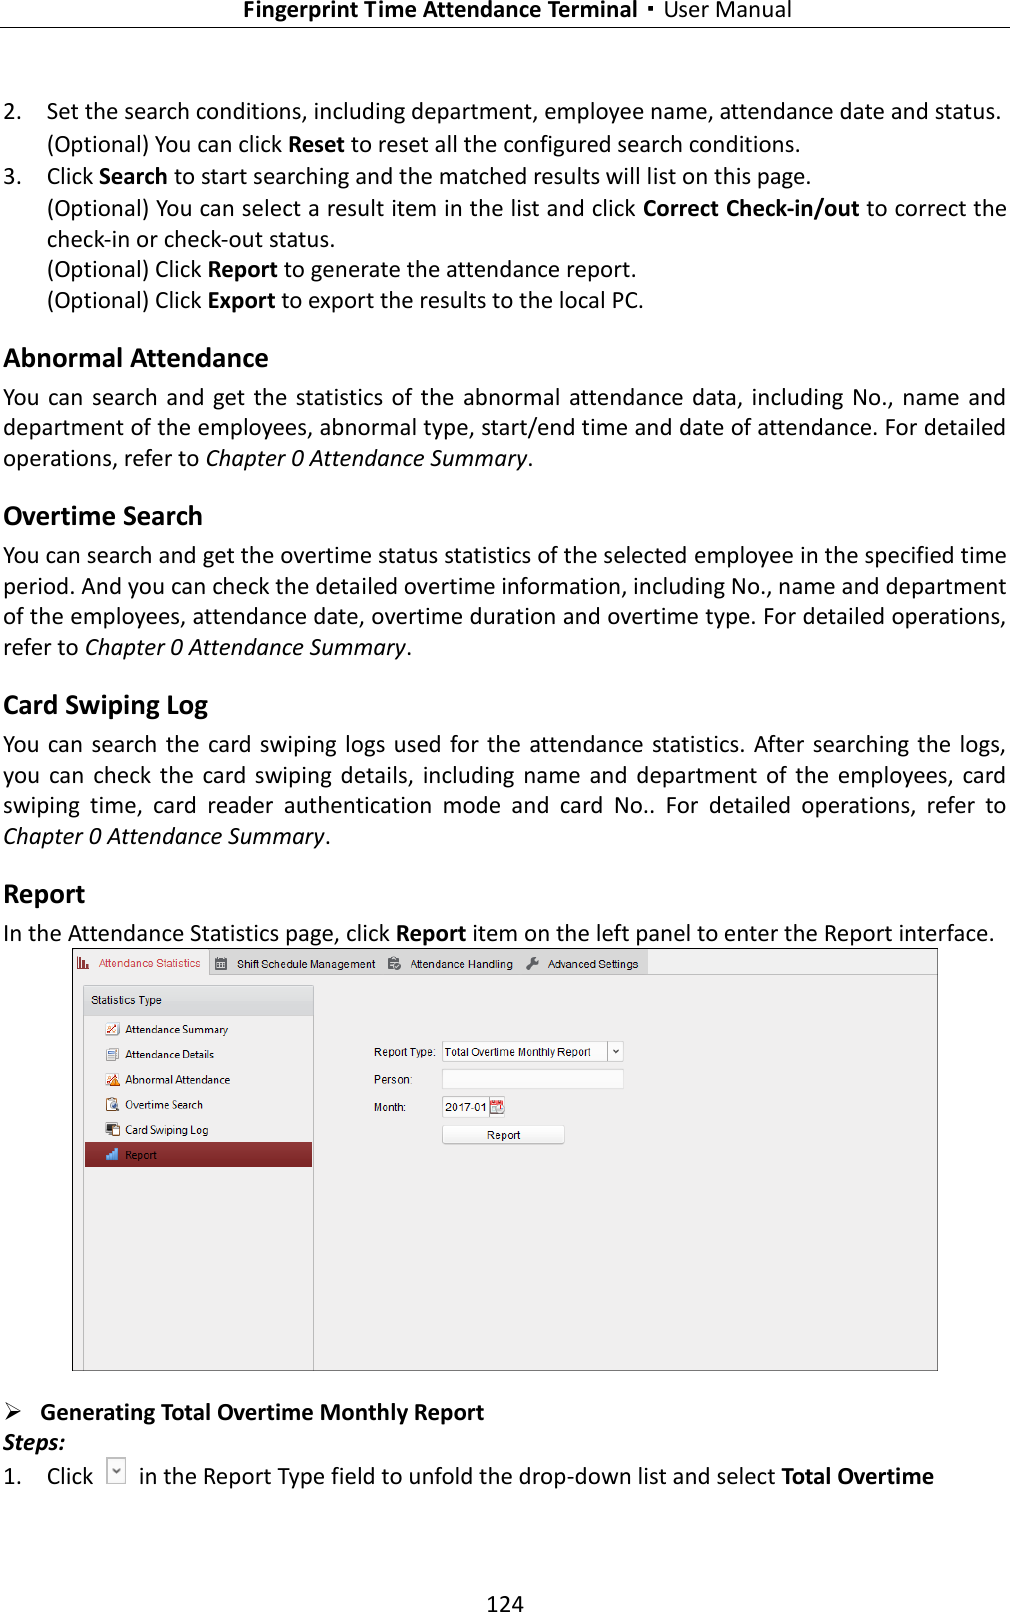   Fingerprint Time Attendance Terminal·User Manual 124  2. Set the search conditions, including department, employee name, attendance date and status. (Optional) You can click Reset to reset all the configured search conditions. 3. Click Search to start searching and the matched results will list on this page. (Optional) You can select a result item in the list and click Correct Check-in/out to correct the check-in or check-out status. (Optional) Click Report to generate the attendance report. (Optional) Click Export to export the results to the local PC. Abnormal Attendance You  can search  and  get the  statistics of the abnormal attendance data, including No., name and department of the employees, abnormal type, start/end time and date of attendance. For detailed operations, refer to Chapter 0 Attendance Summary. Overtime Search You can search and get the overtime status statistics of the selected employee in the specified time period. And you can check the detailed overtime information, including No., name and department of the employees, attendance date, overtime duration and overtime type. For detailed operations, refer to Chapter 0 Attendance Summary. Card Swiping Log You can  search the  card  swiping  logs used for the attendance statistics. After searching the logs, you  can  check  the  card swiping  details,  including  name  and department  of  the  employees,  card swiping  time,  card  reader  authentication  mode  and  card  No..  For  detailed  operations,  refer  to Chapter 0 Attendance Summary. Report In the Attendance Statistics page, click Report item on the left panel to enter the Report interface.   Generating Total Overtime Monthly Report Steps: 1. Click    in the Report Type field to unfold the drop-down list and select Total Overtime 